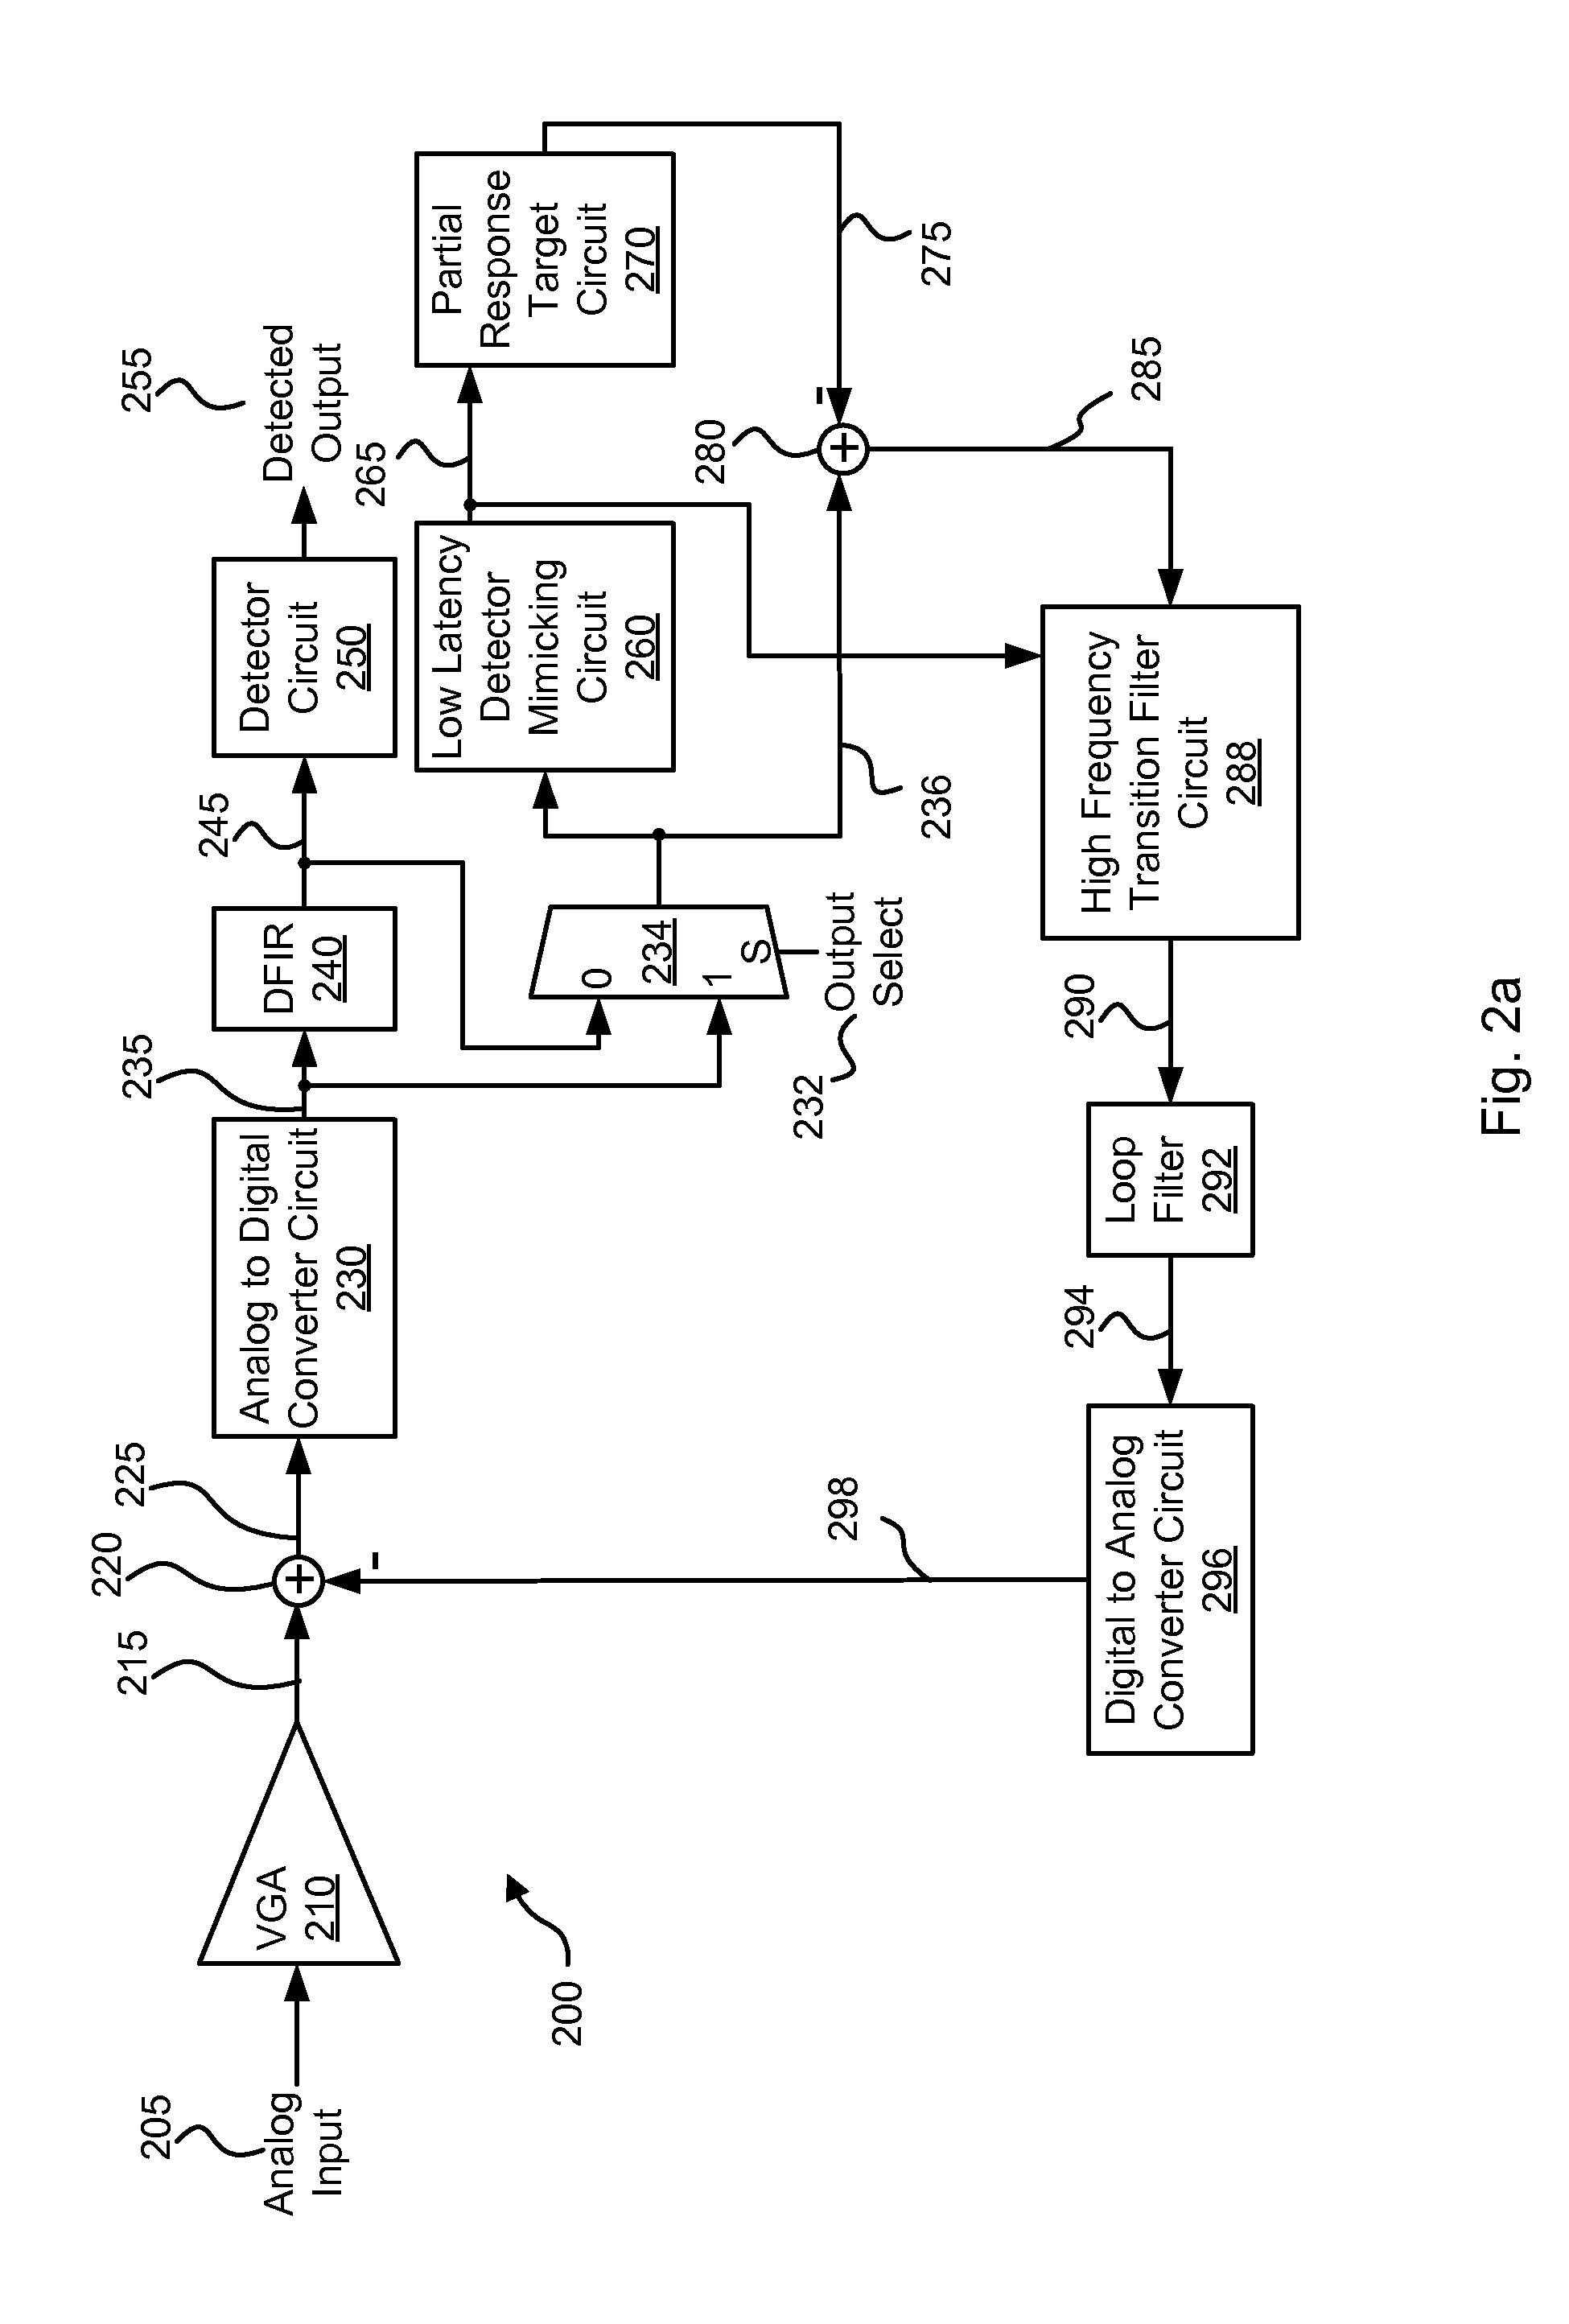 Systems and methods for low latency noise cancellation